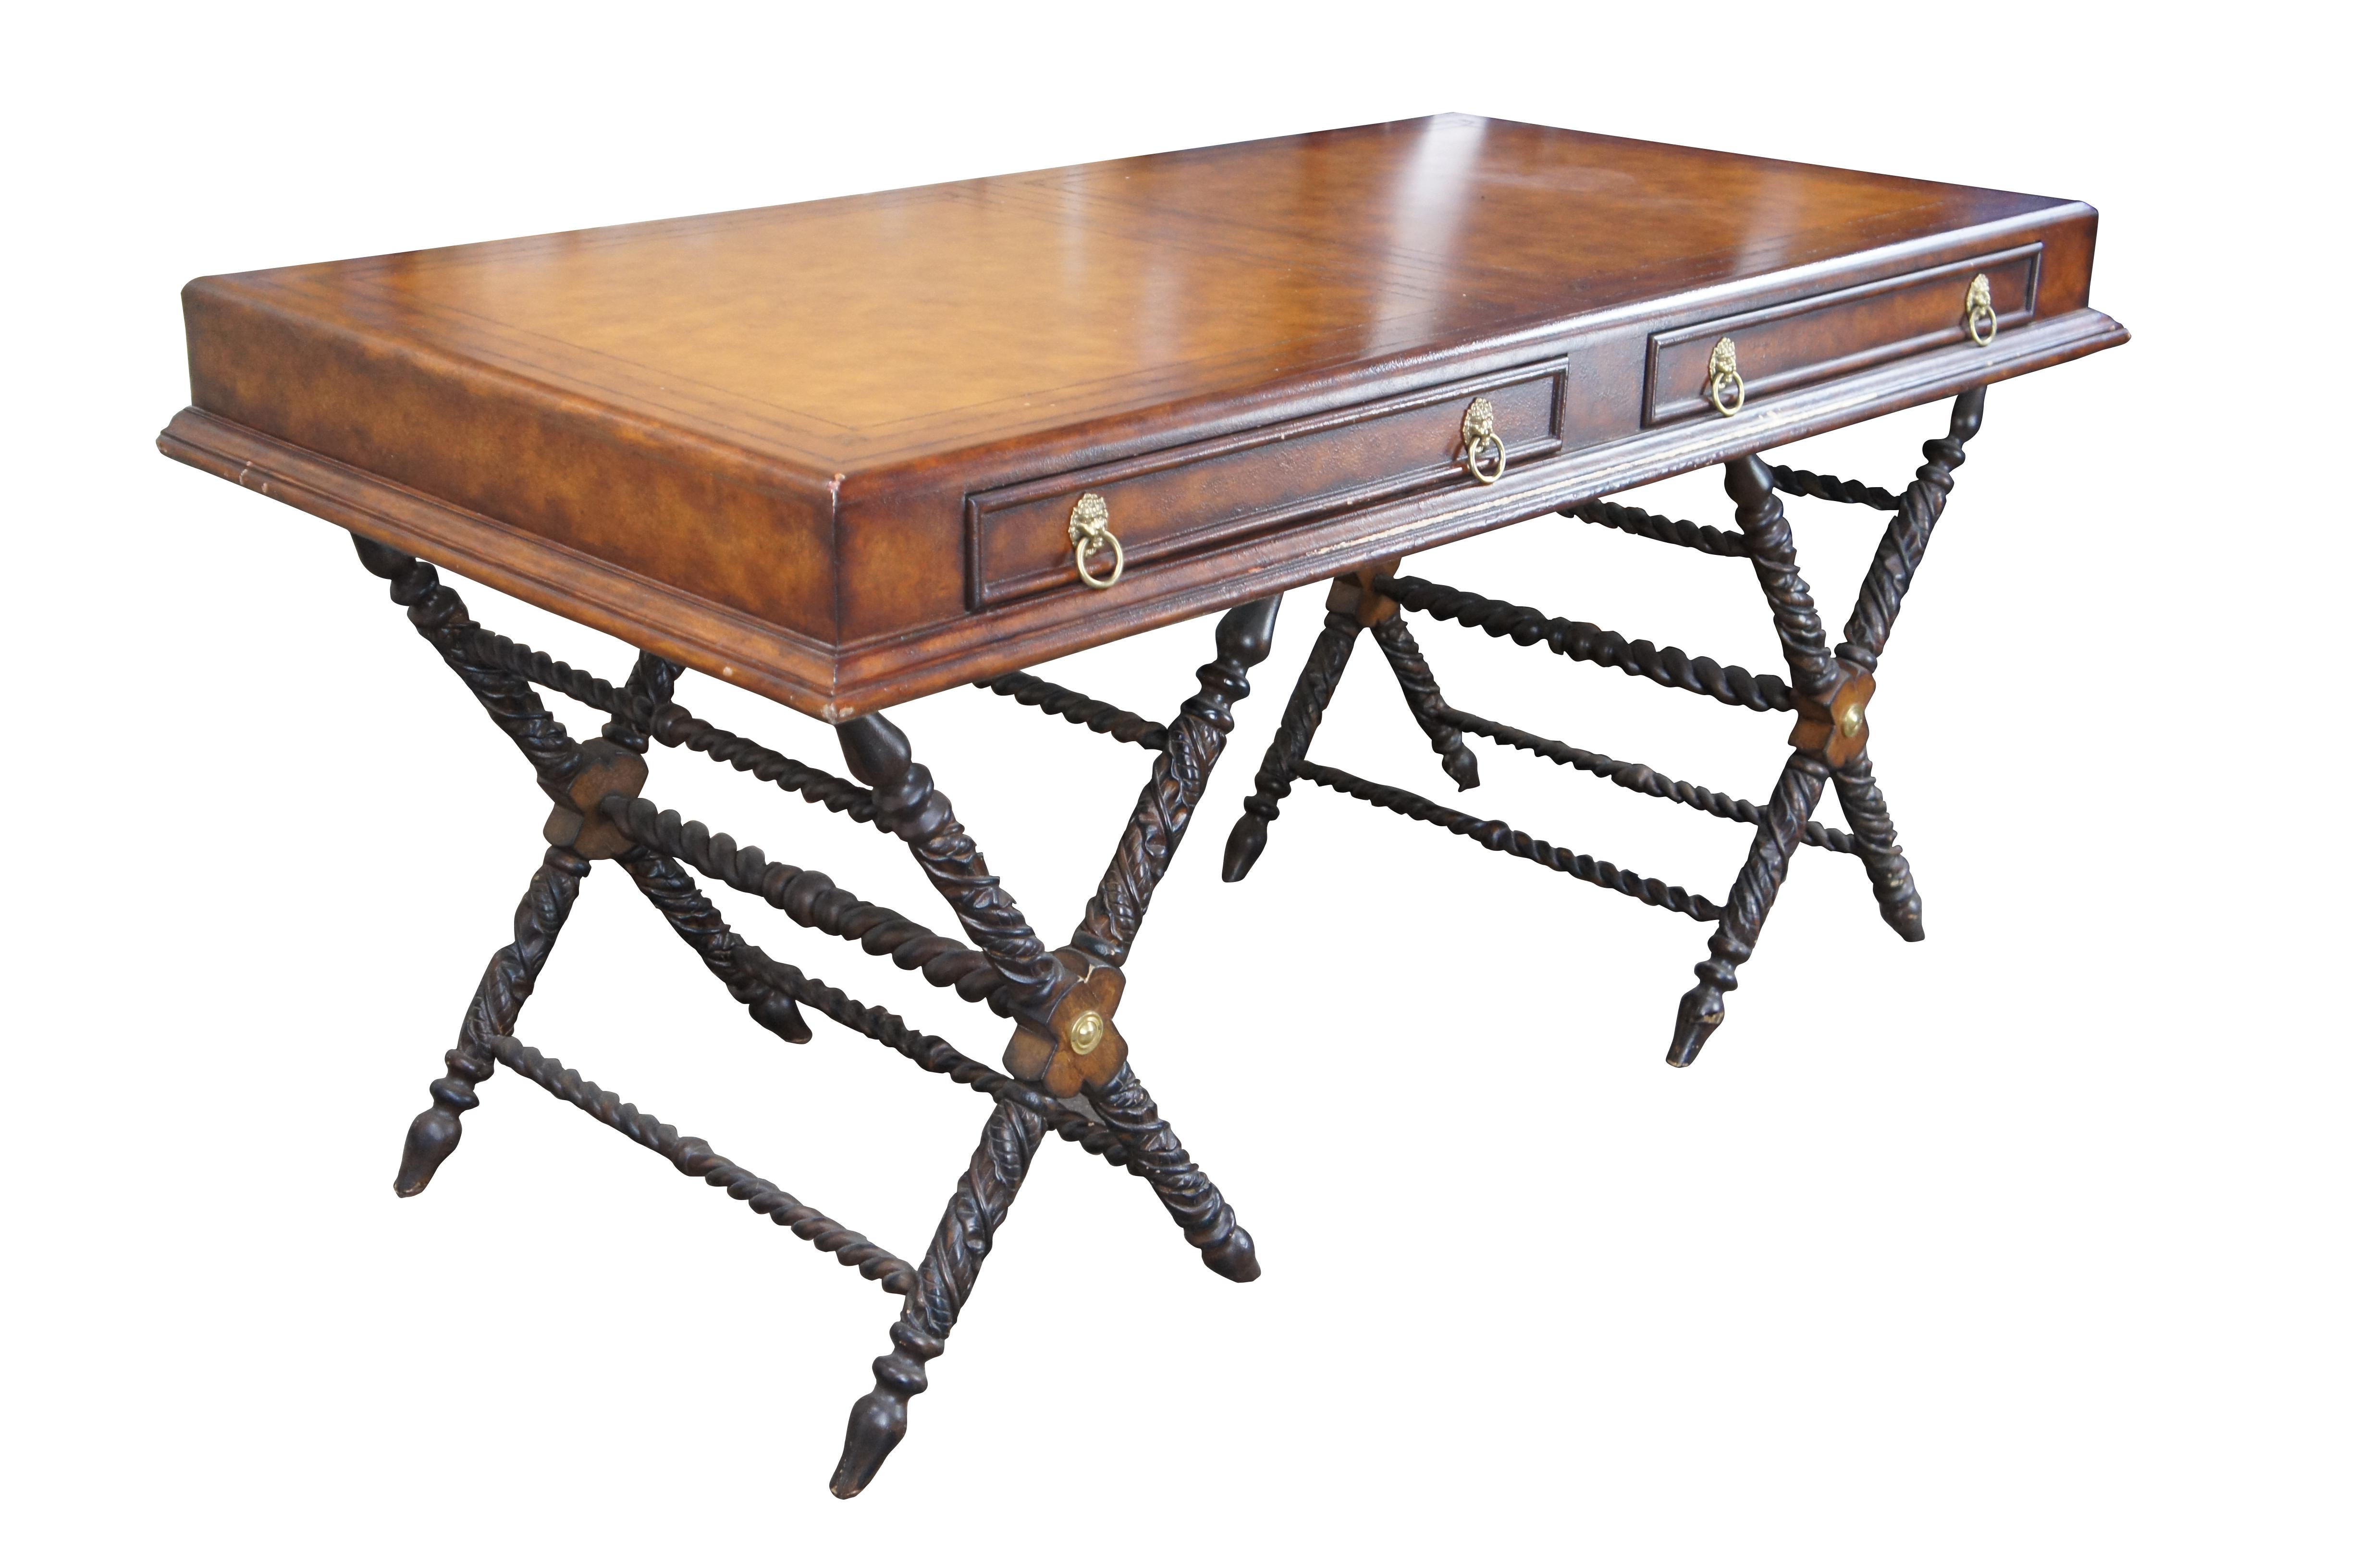 Late 20th Century campaign style desk. Features a rectangular form with brown tooled leather top and two drawers in the frieze. Each drawer has brass lion knocker pulls. The desk is supported by carved and twisted X form pedestal base. Made in the